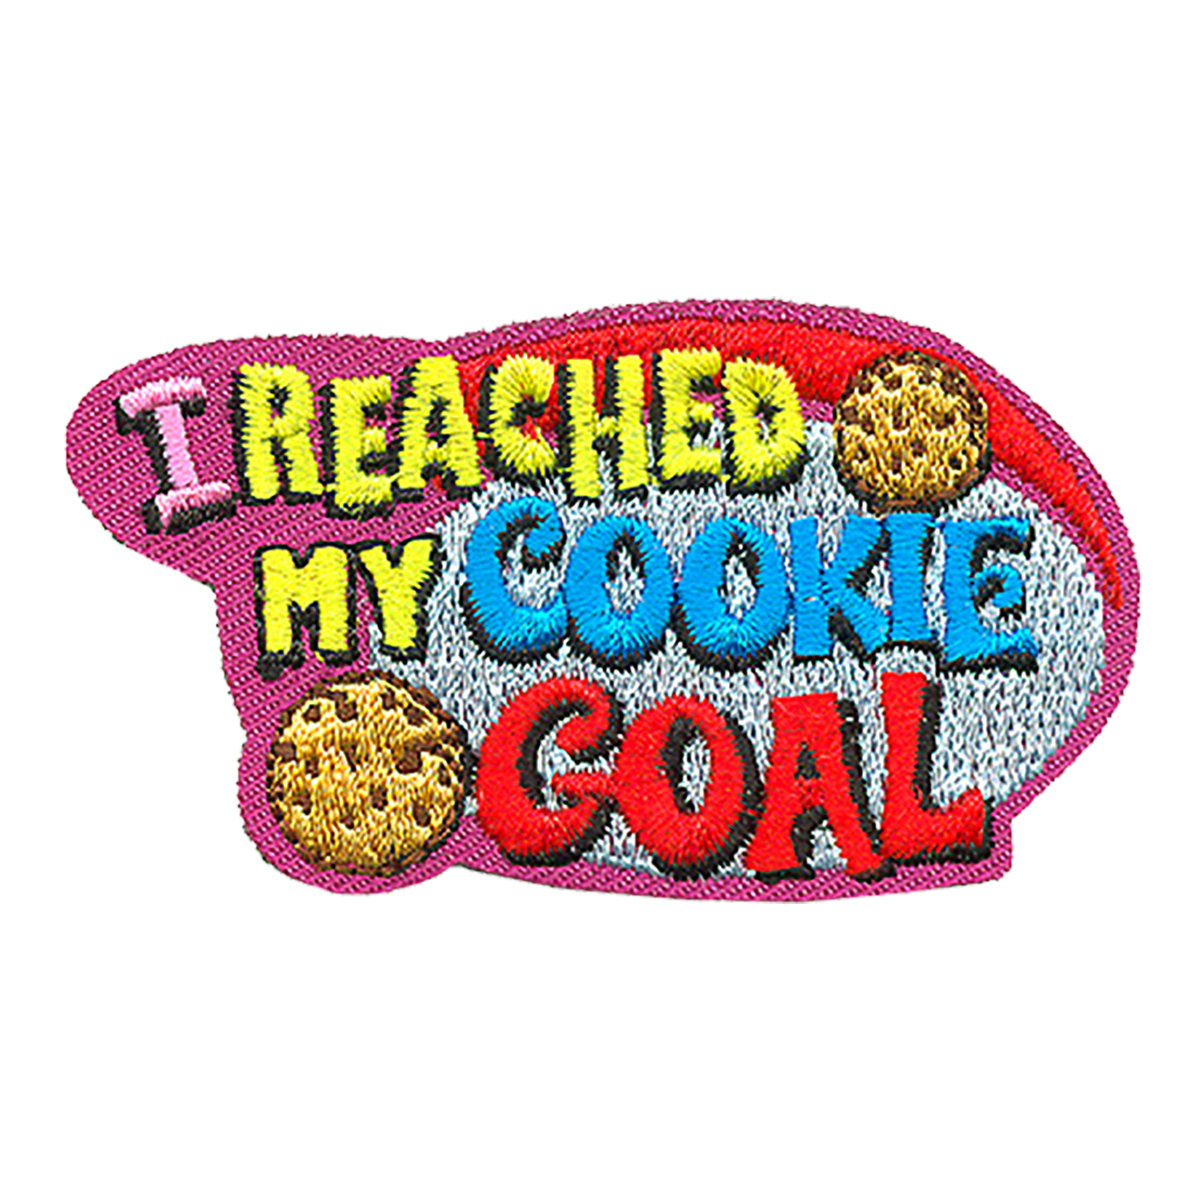 I Reached My Cookie Goal - W 